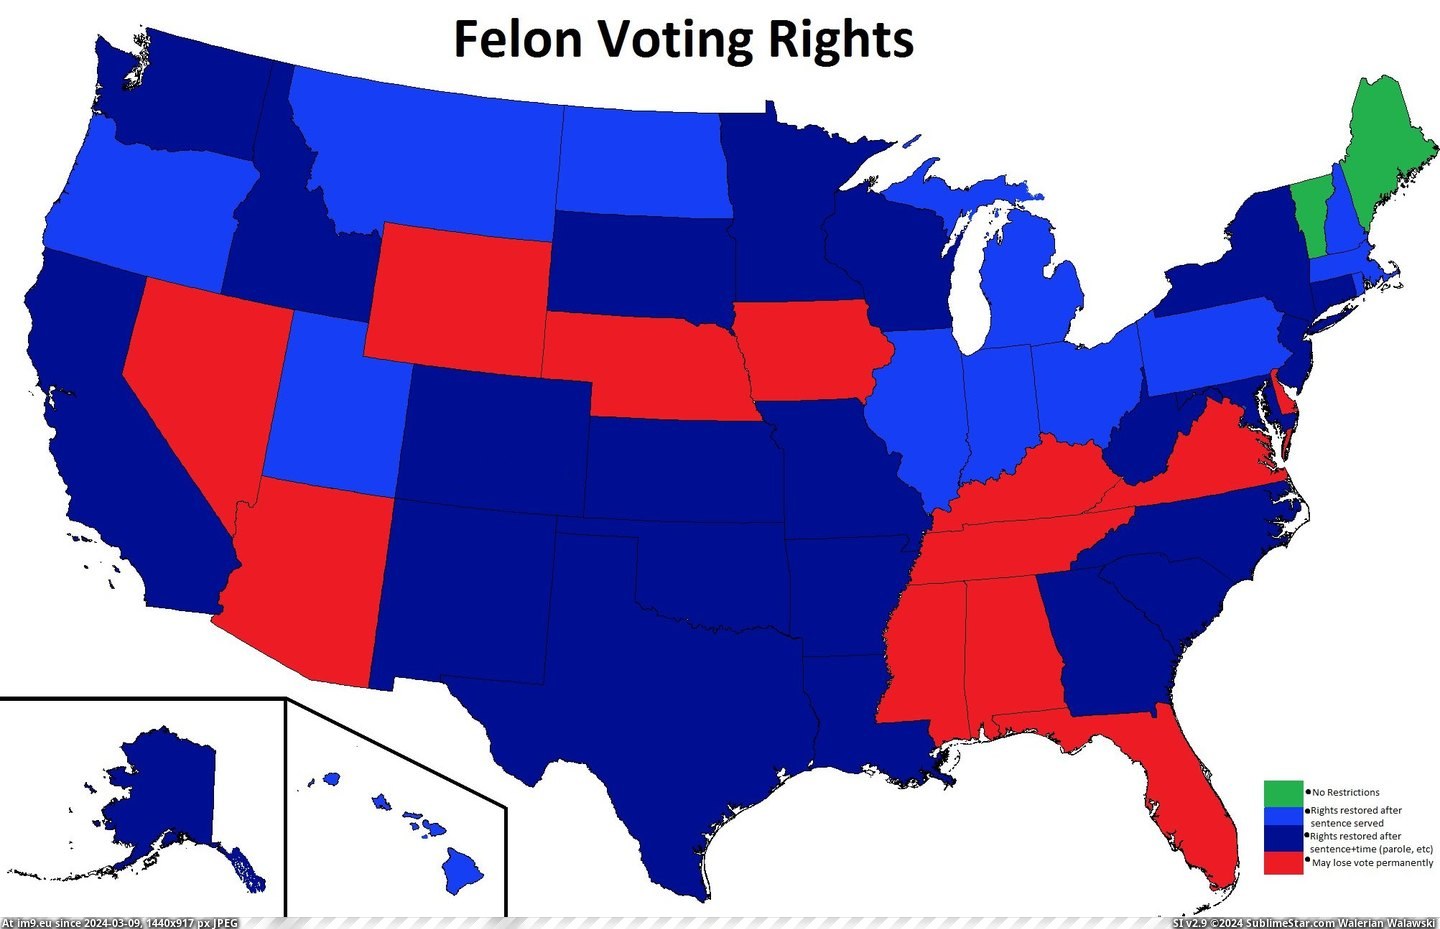 #Usa #Voting #Felon #Rights #2005x1289 [Mapporn] Felon Voting Rights in the USA [2005x1289] [OC] Pic. (Image of album My r/MAPS favs))